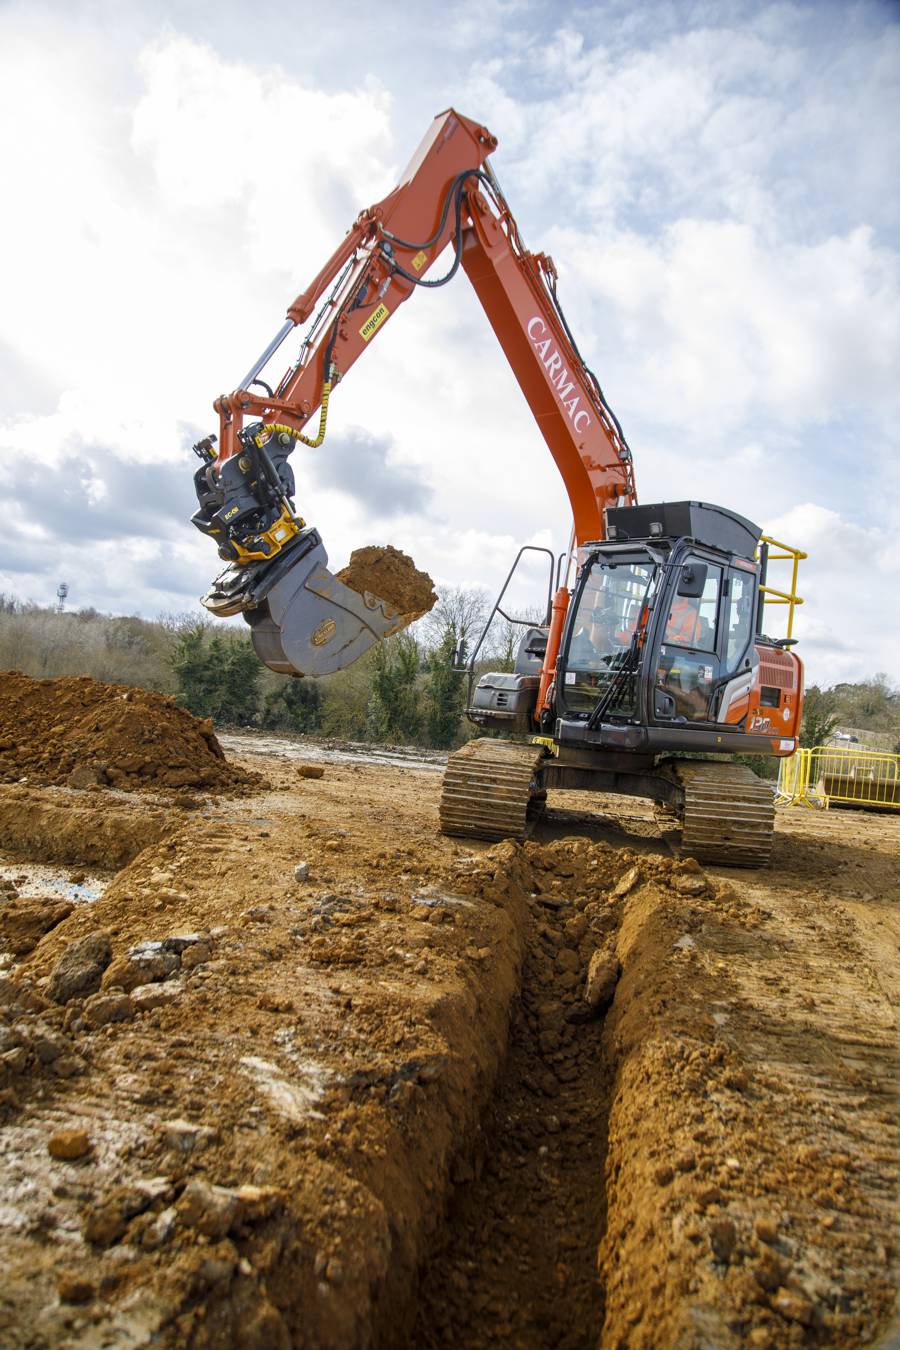 Carmac expands Excavator Fleet to keep pace with Housebuilding Sector demand